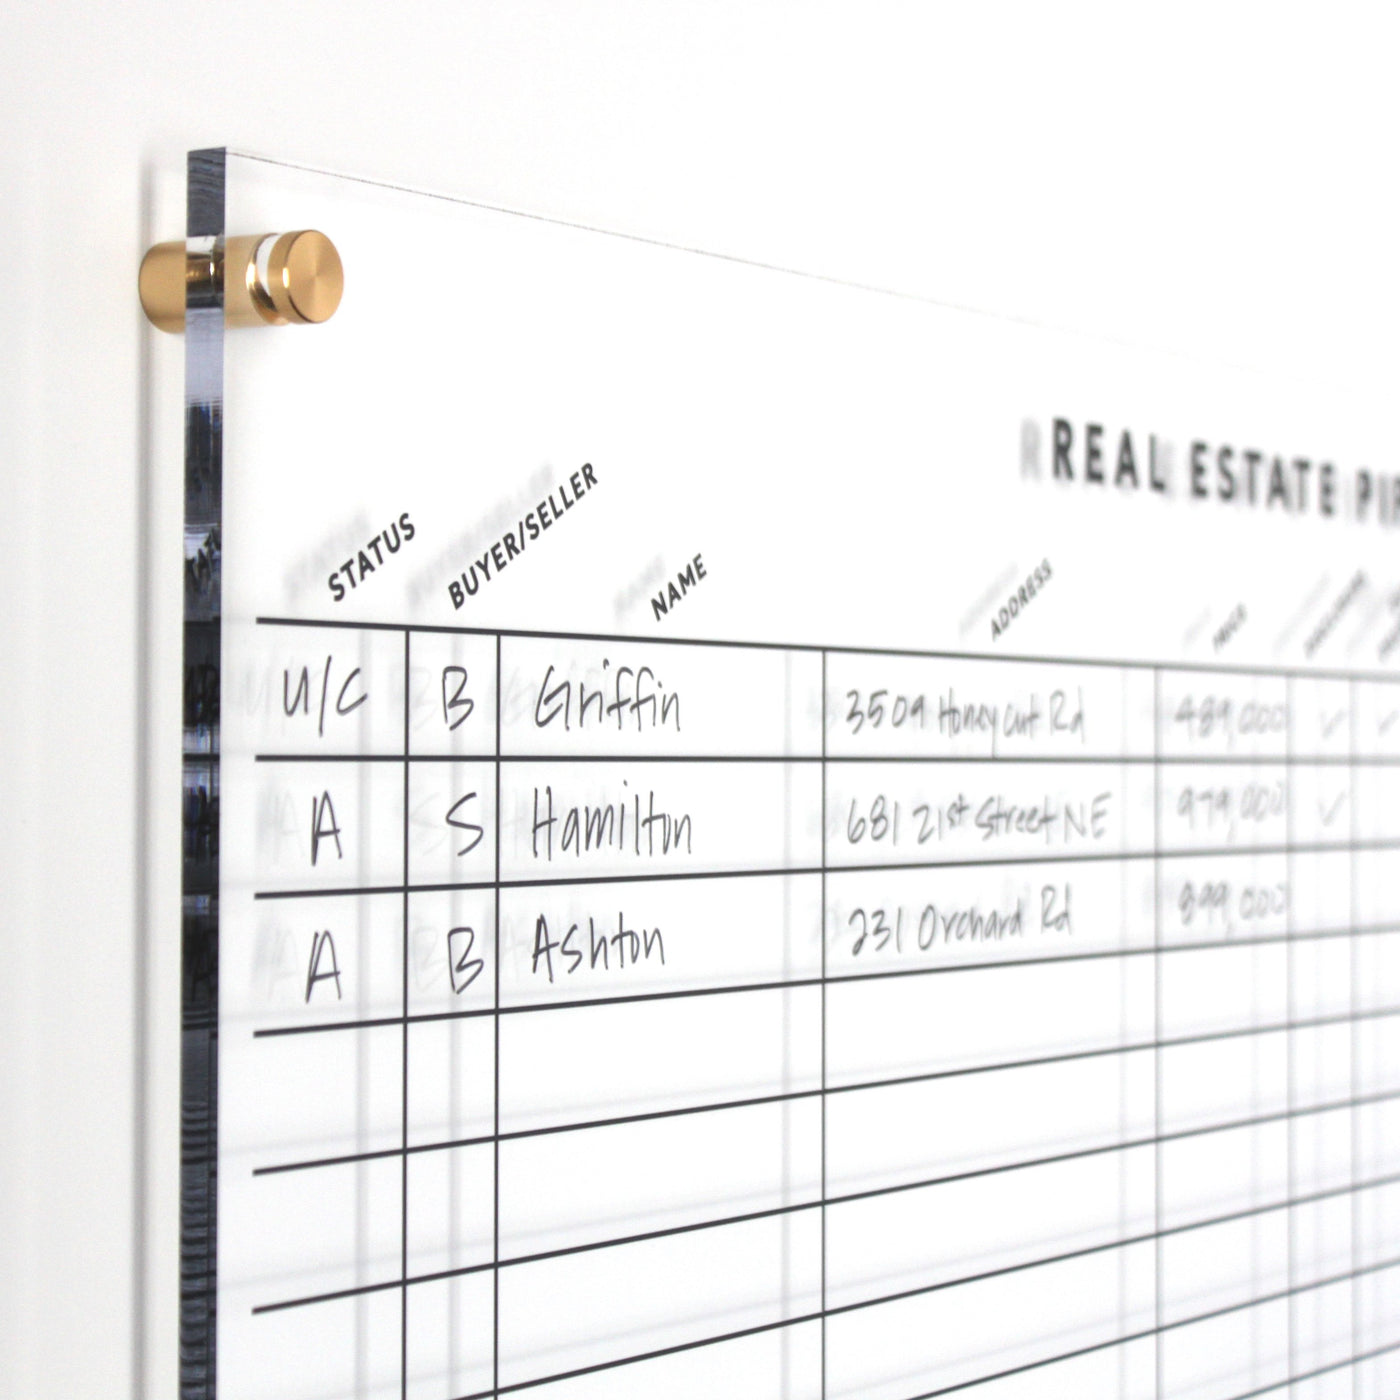 Real Estate Pipeline Acrylic Board with 2 columns